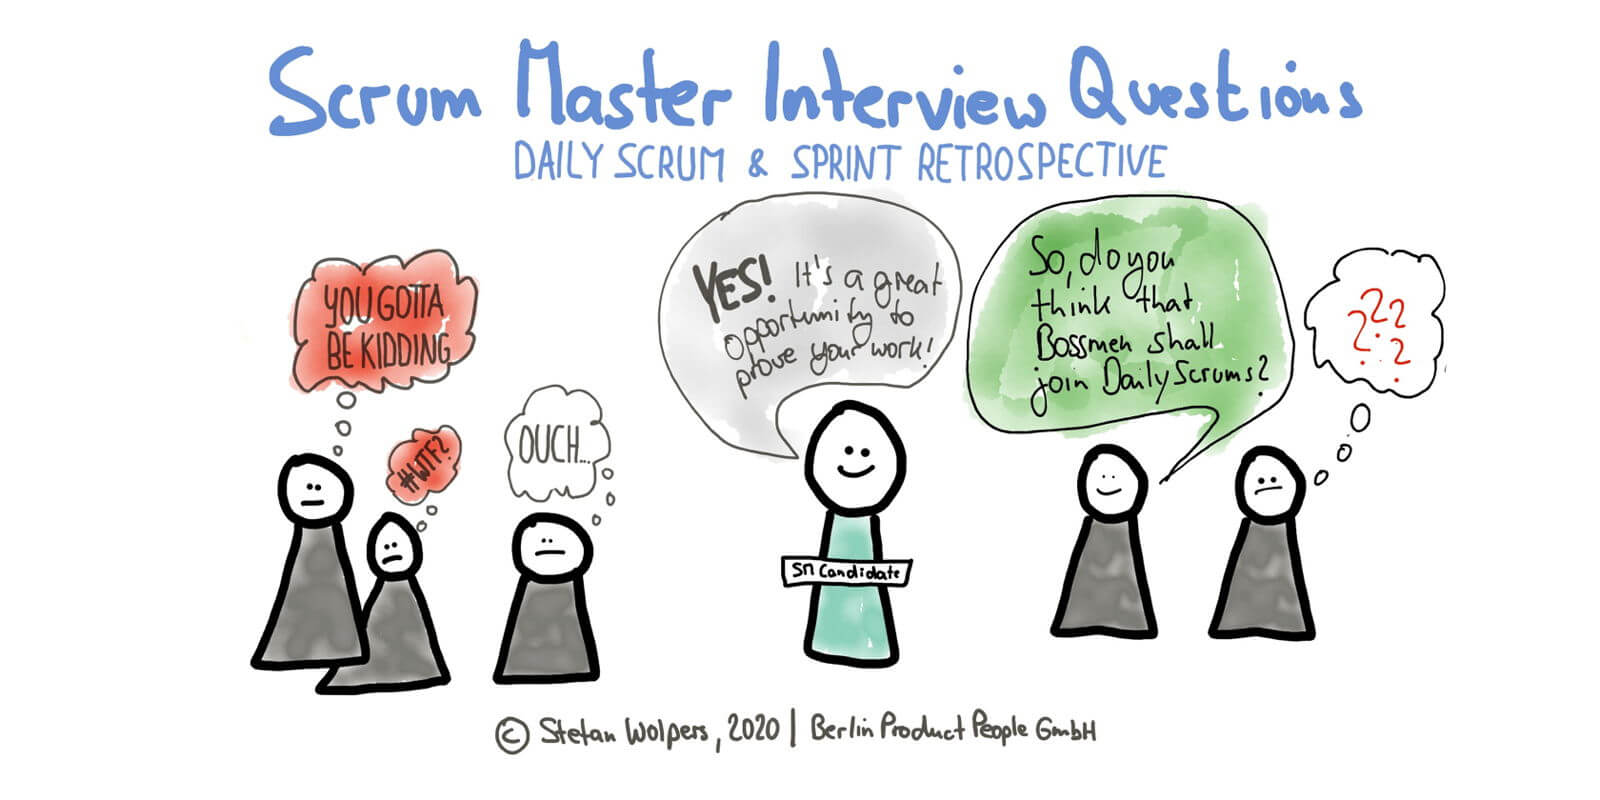 Scrum Master Interview Questions: Daily Scrum. Sprint Retrospective — Age-of-Product.com